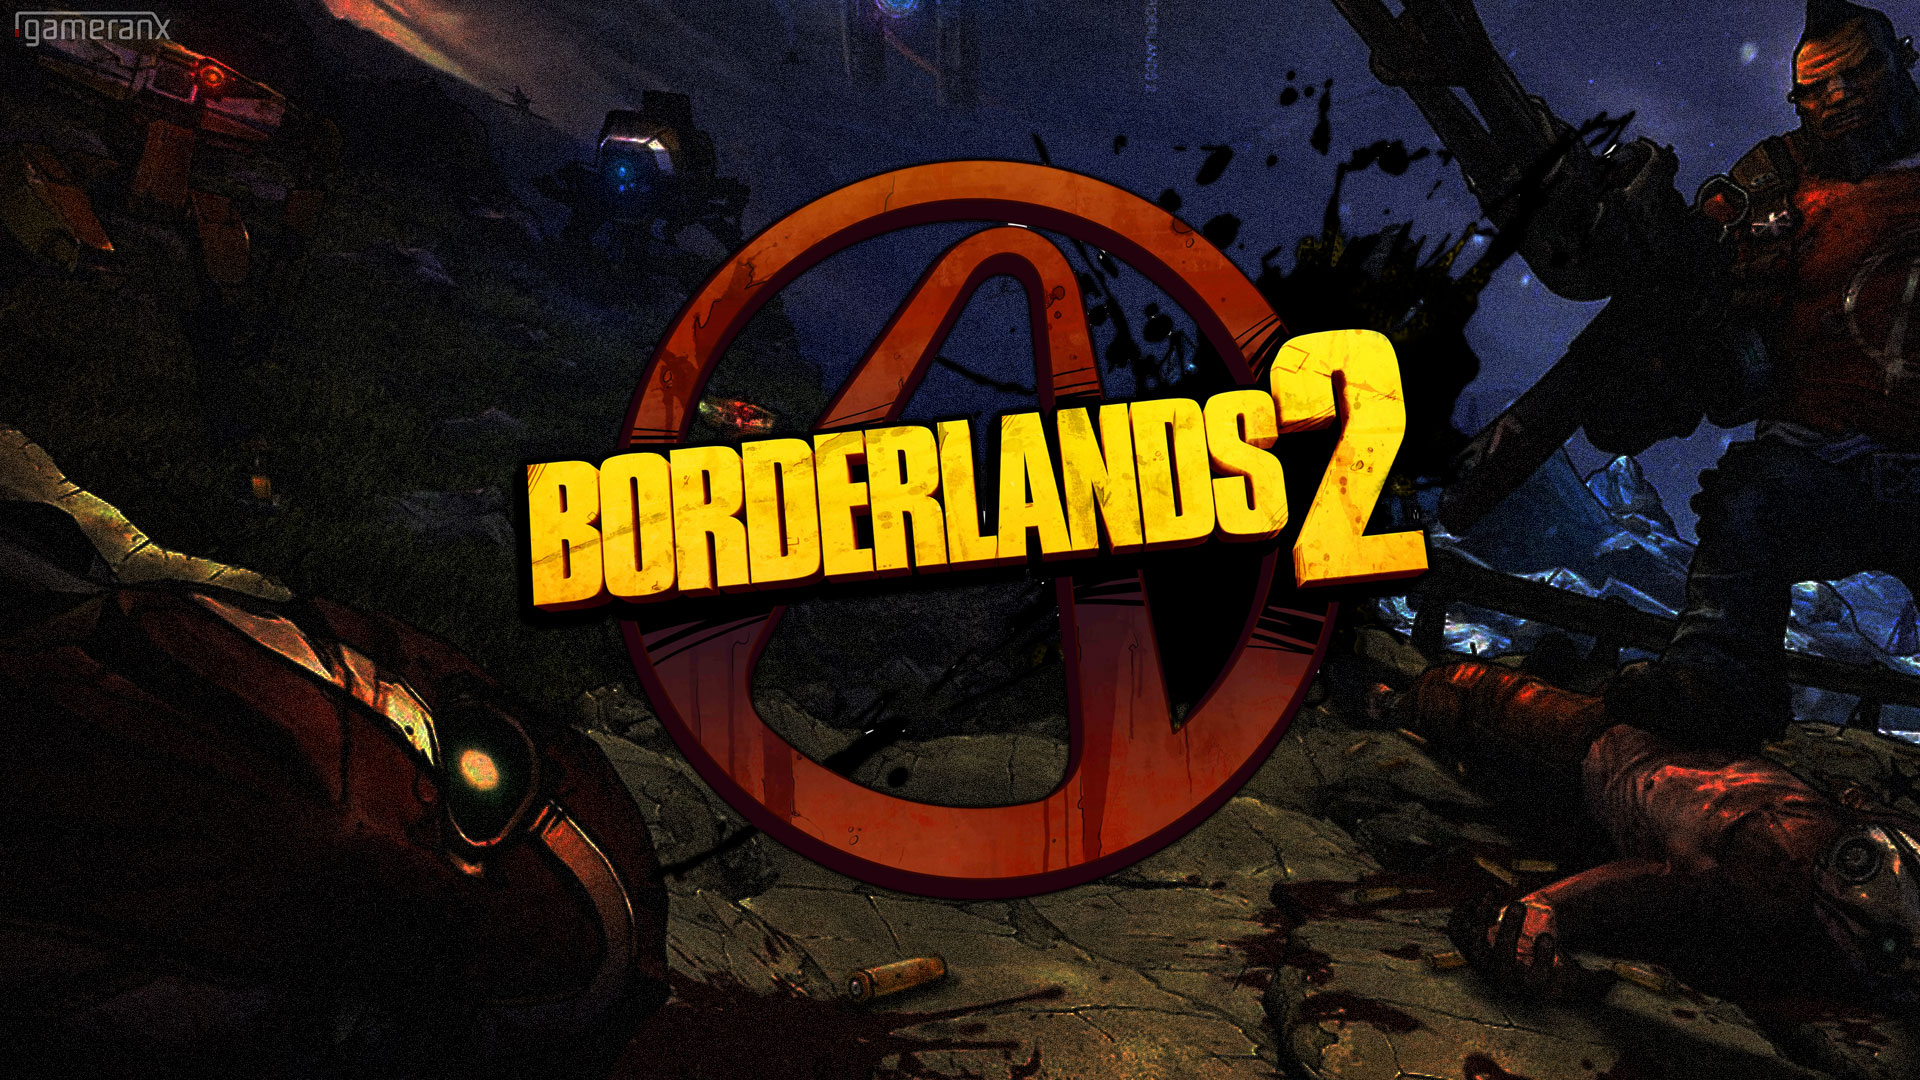 Borderlands 2 Wallpapers in HD Page 2